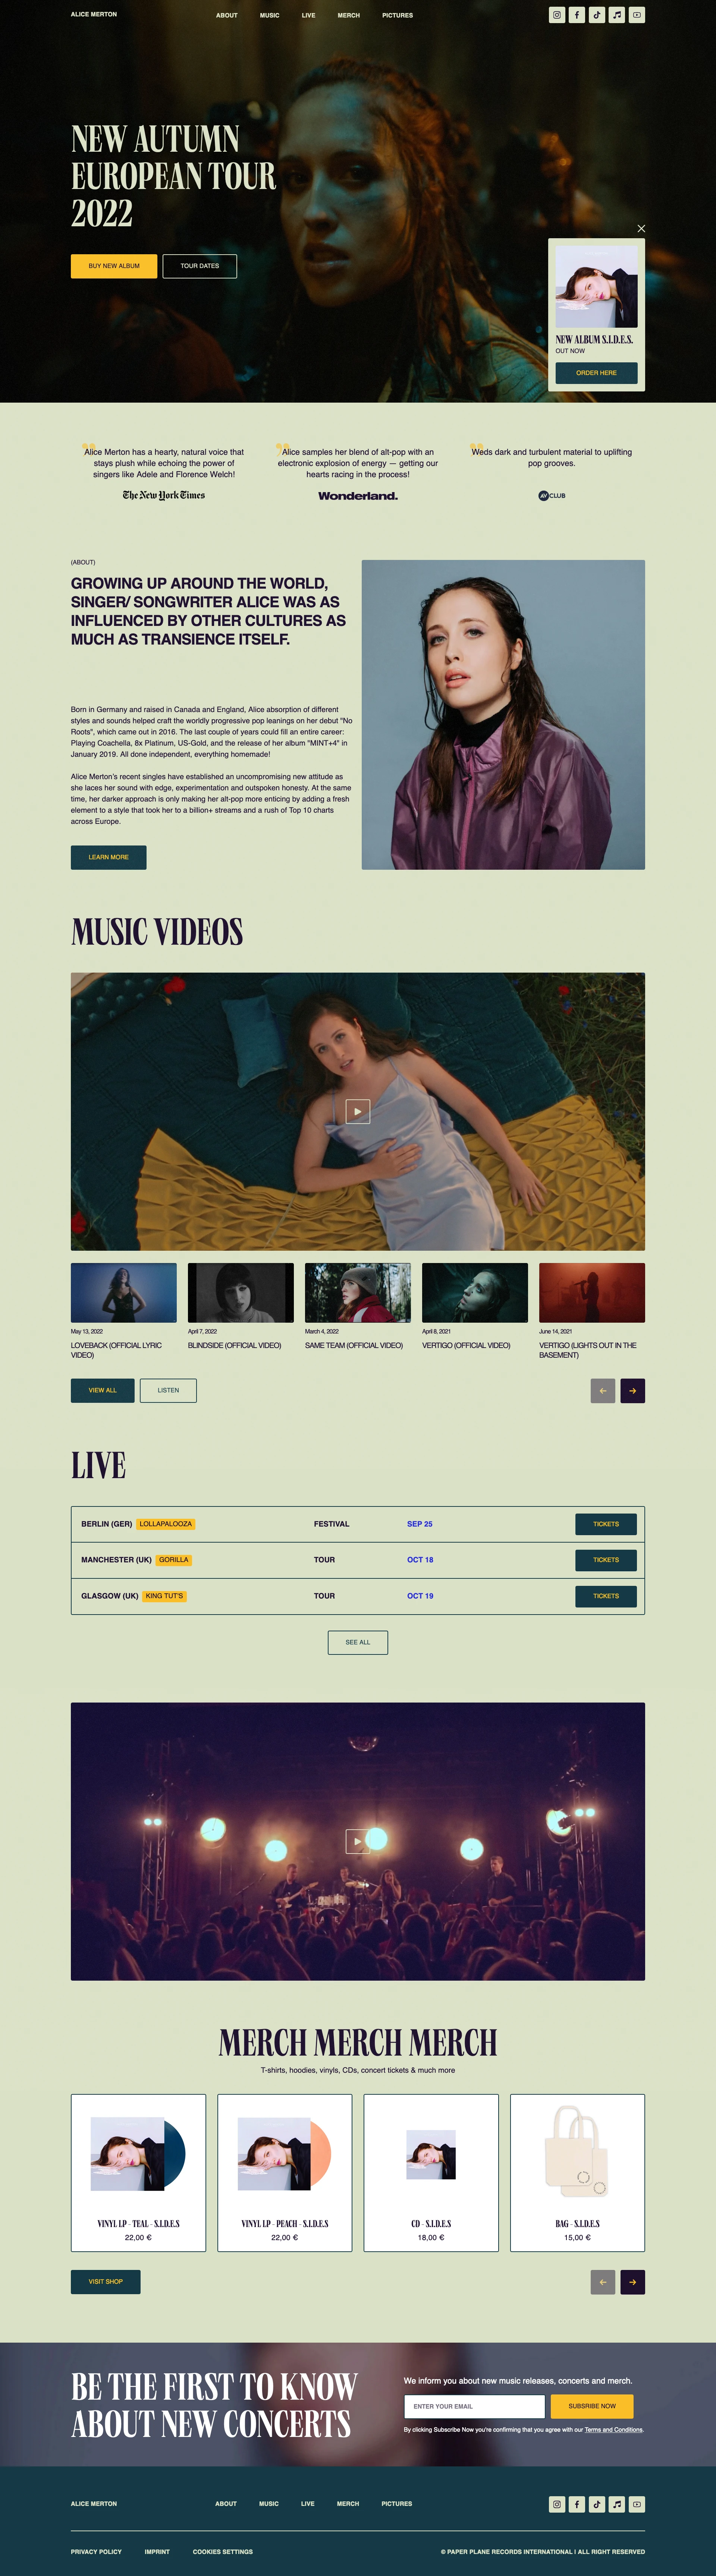 Alice Merton Landing Page Example: Growing up around the world, singer/ songwriter Alice was as influenced by other cultures as much as transience itself.